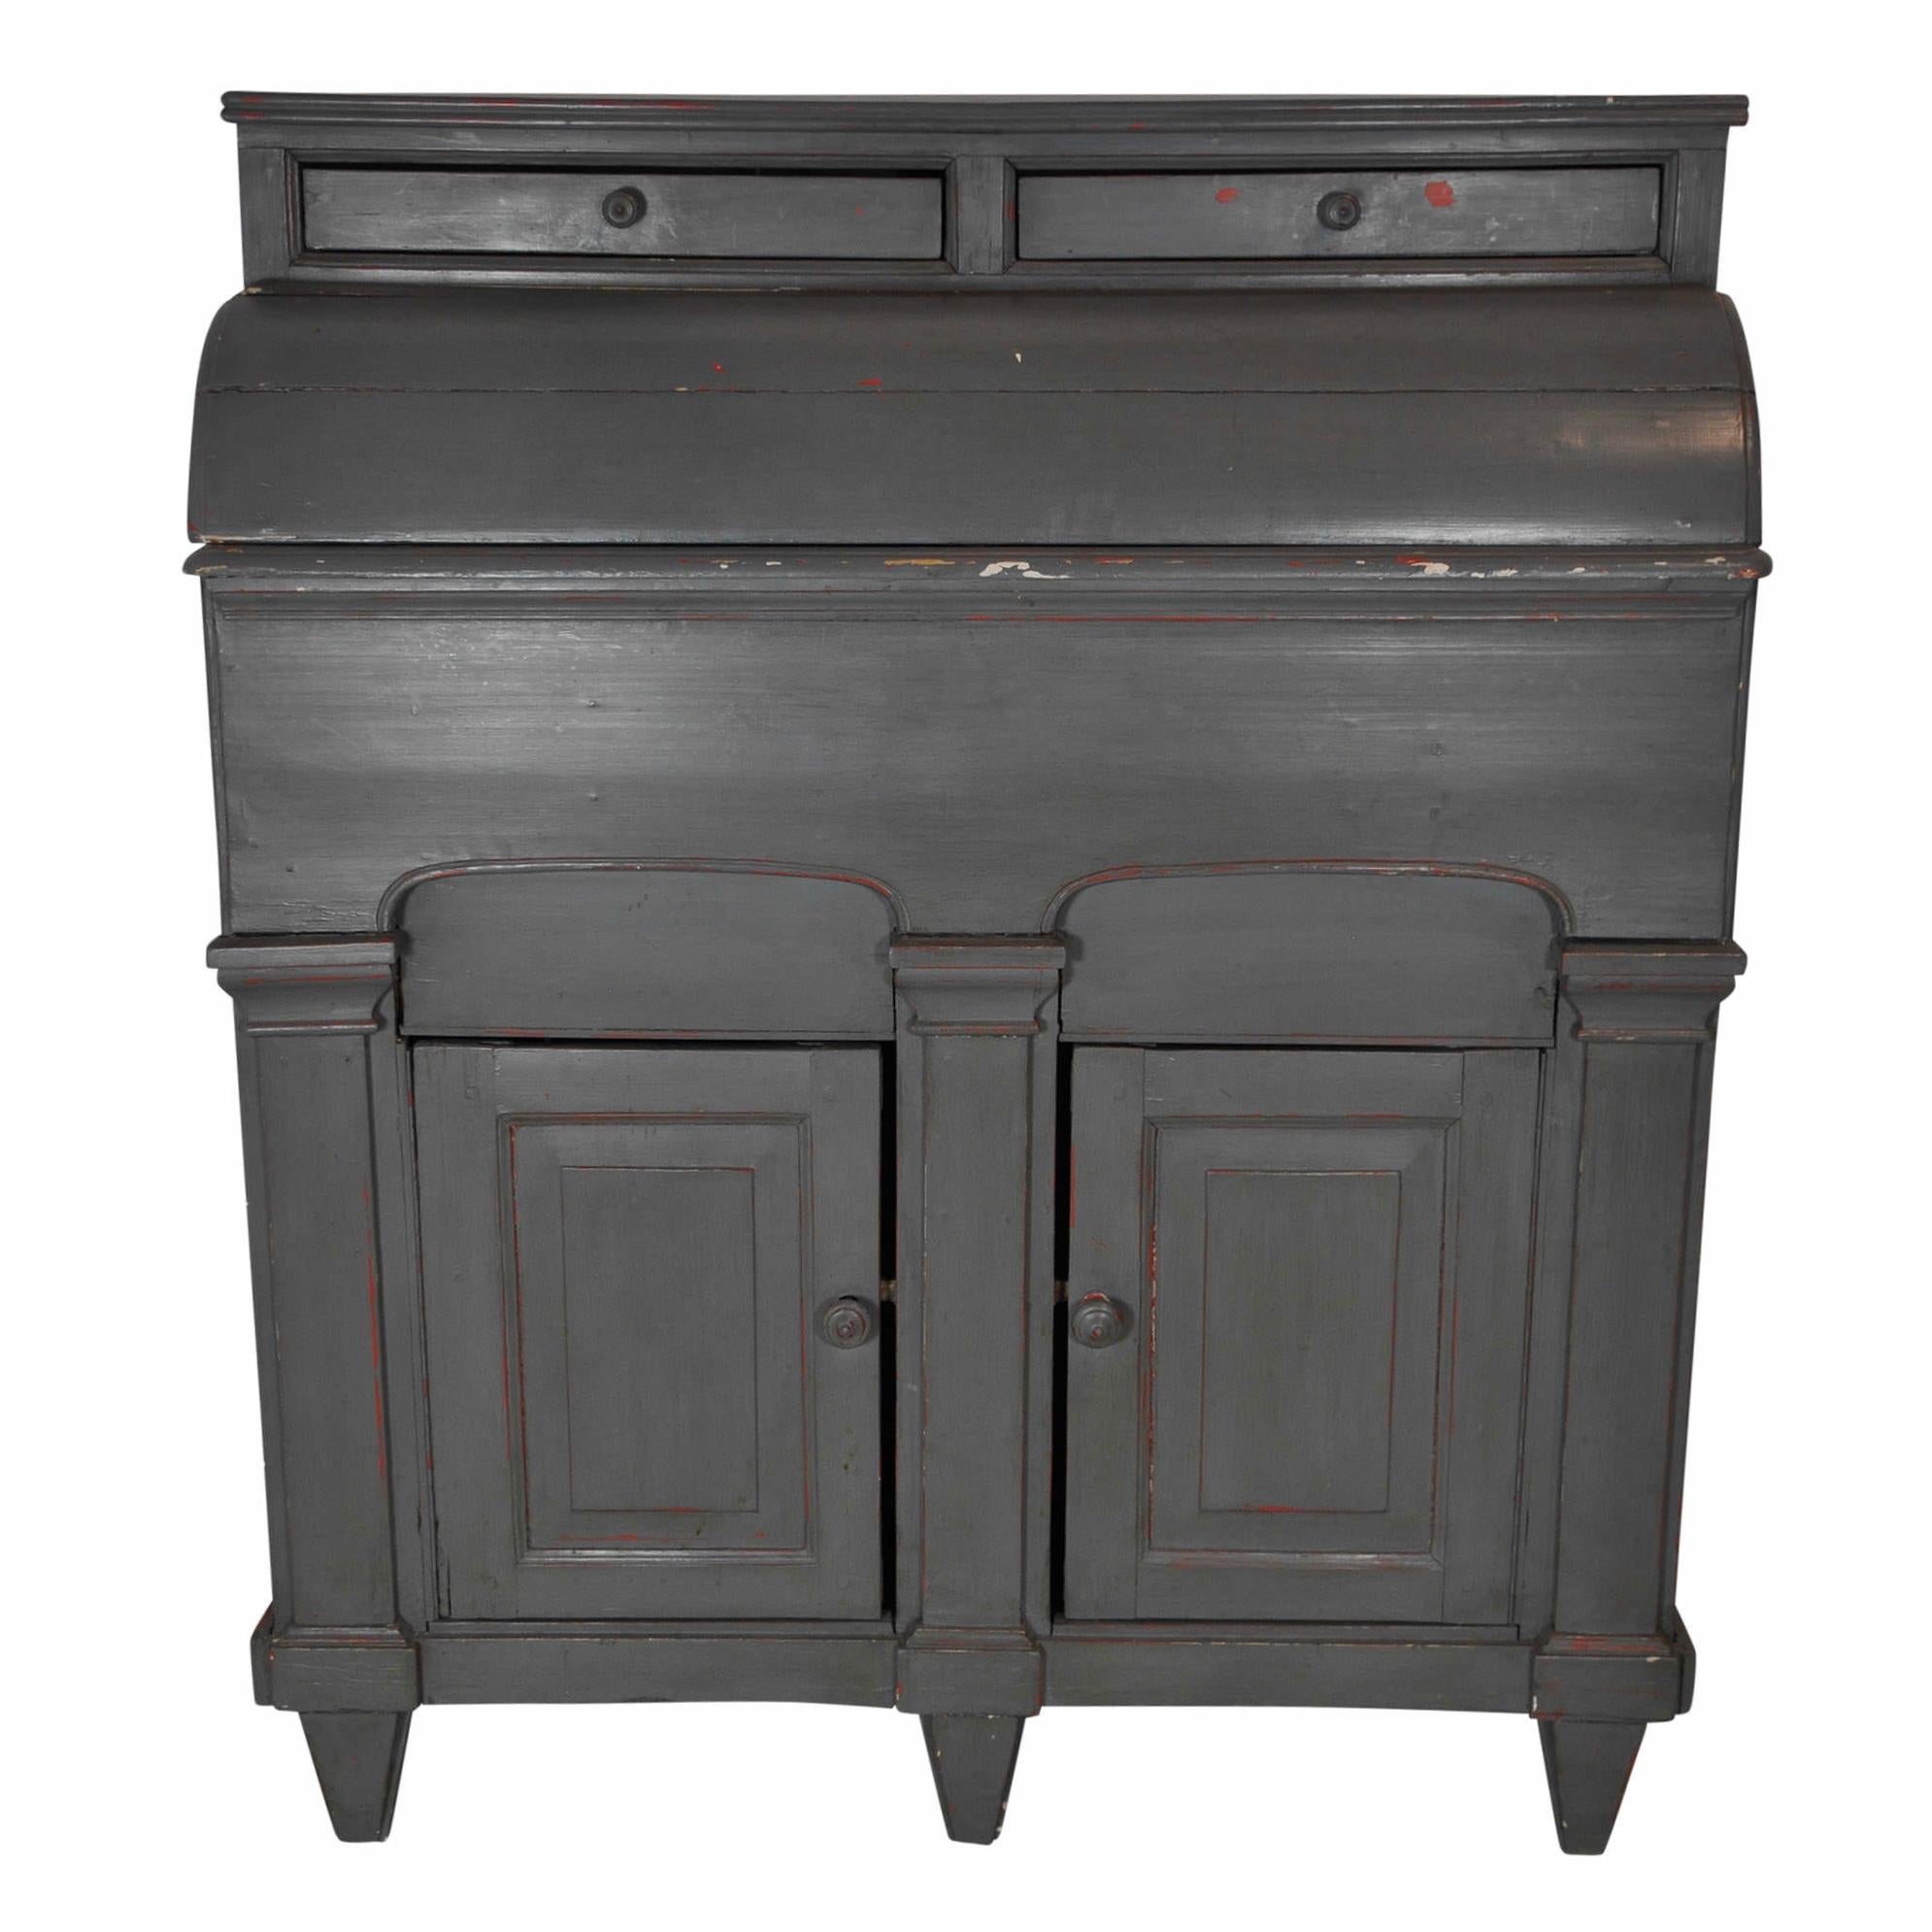 Painted Pine Cabinet with Storage Bins, circa 1900